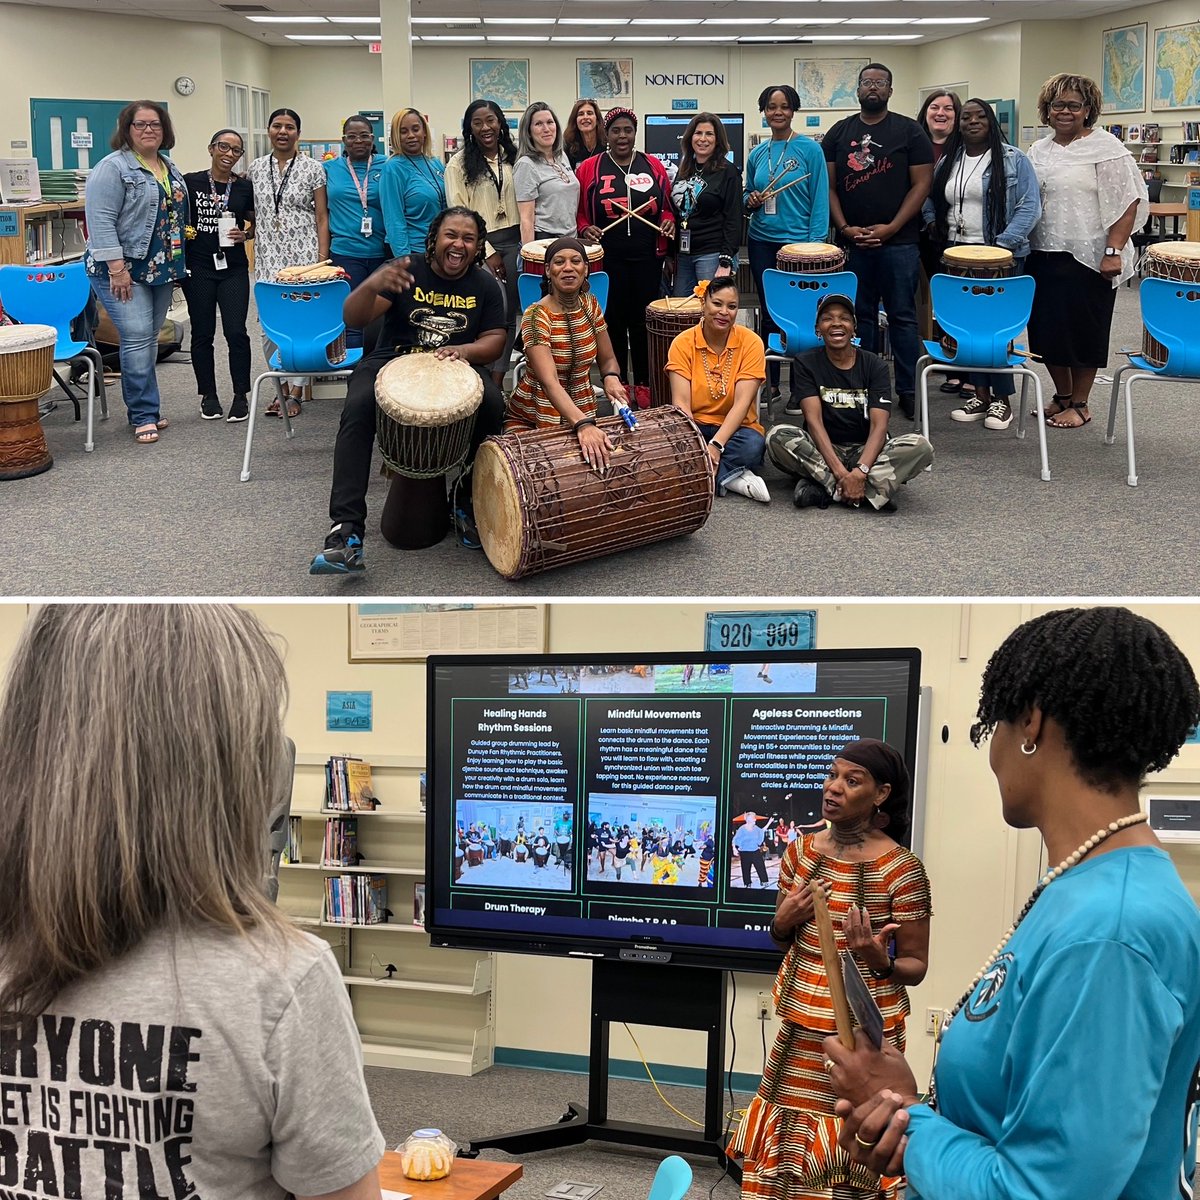 What an amazing opportunity for our staff to cut loose with Dubuque Fan Wellness, LLC and learn all about the wellness opportunities her team offers! We had a blast! ⁦@STMSPrincipalT⁩ ⁦@CasablancaMs⁩ ⁦@APLendickSTMS⁩